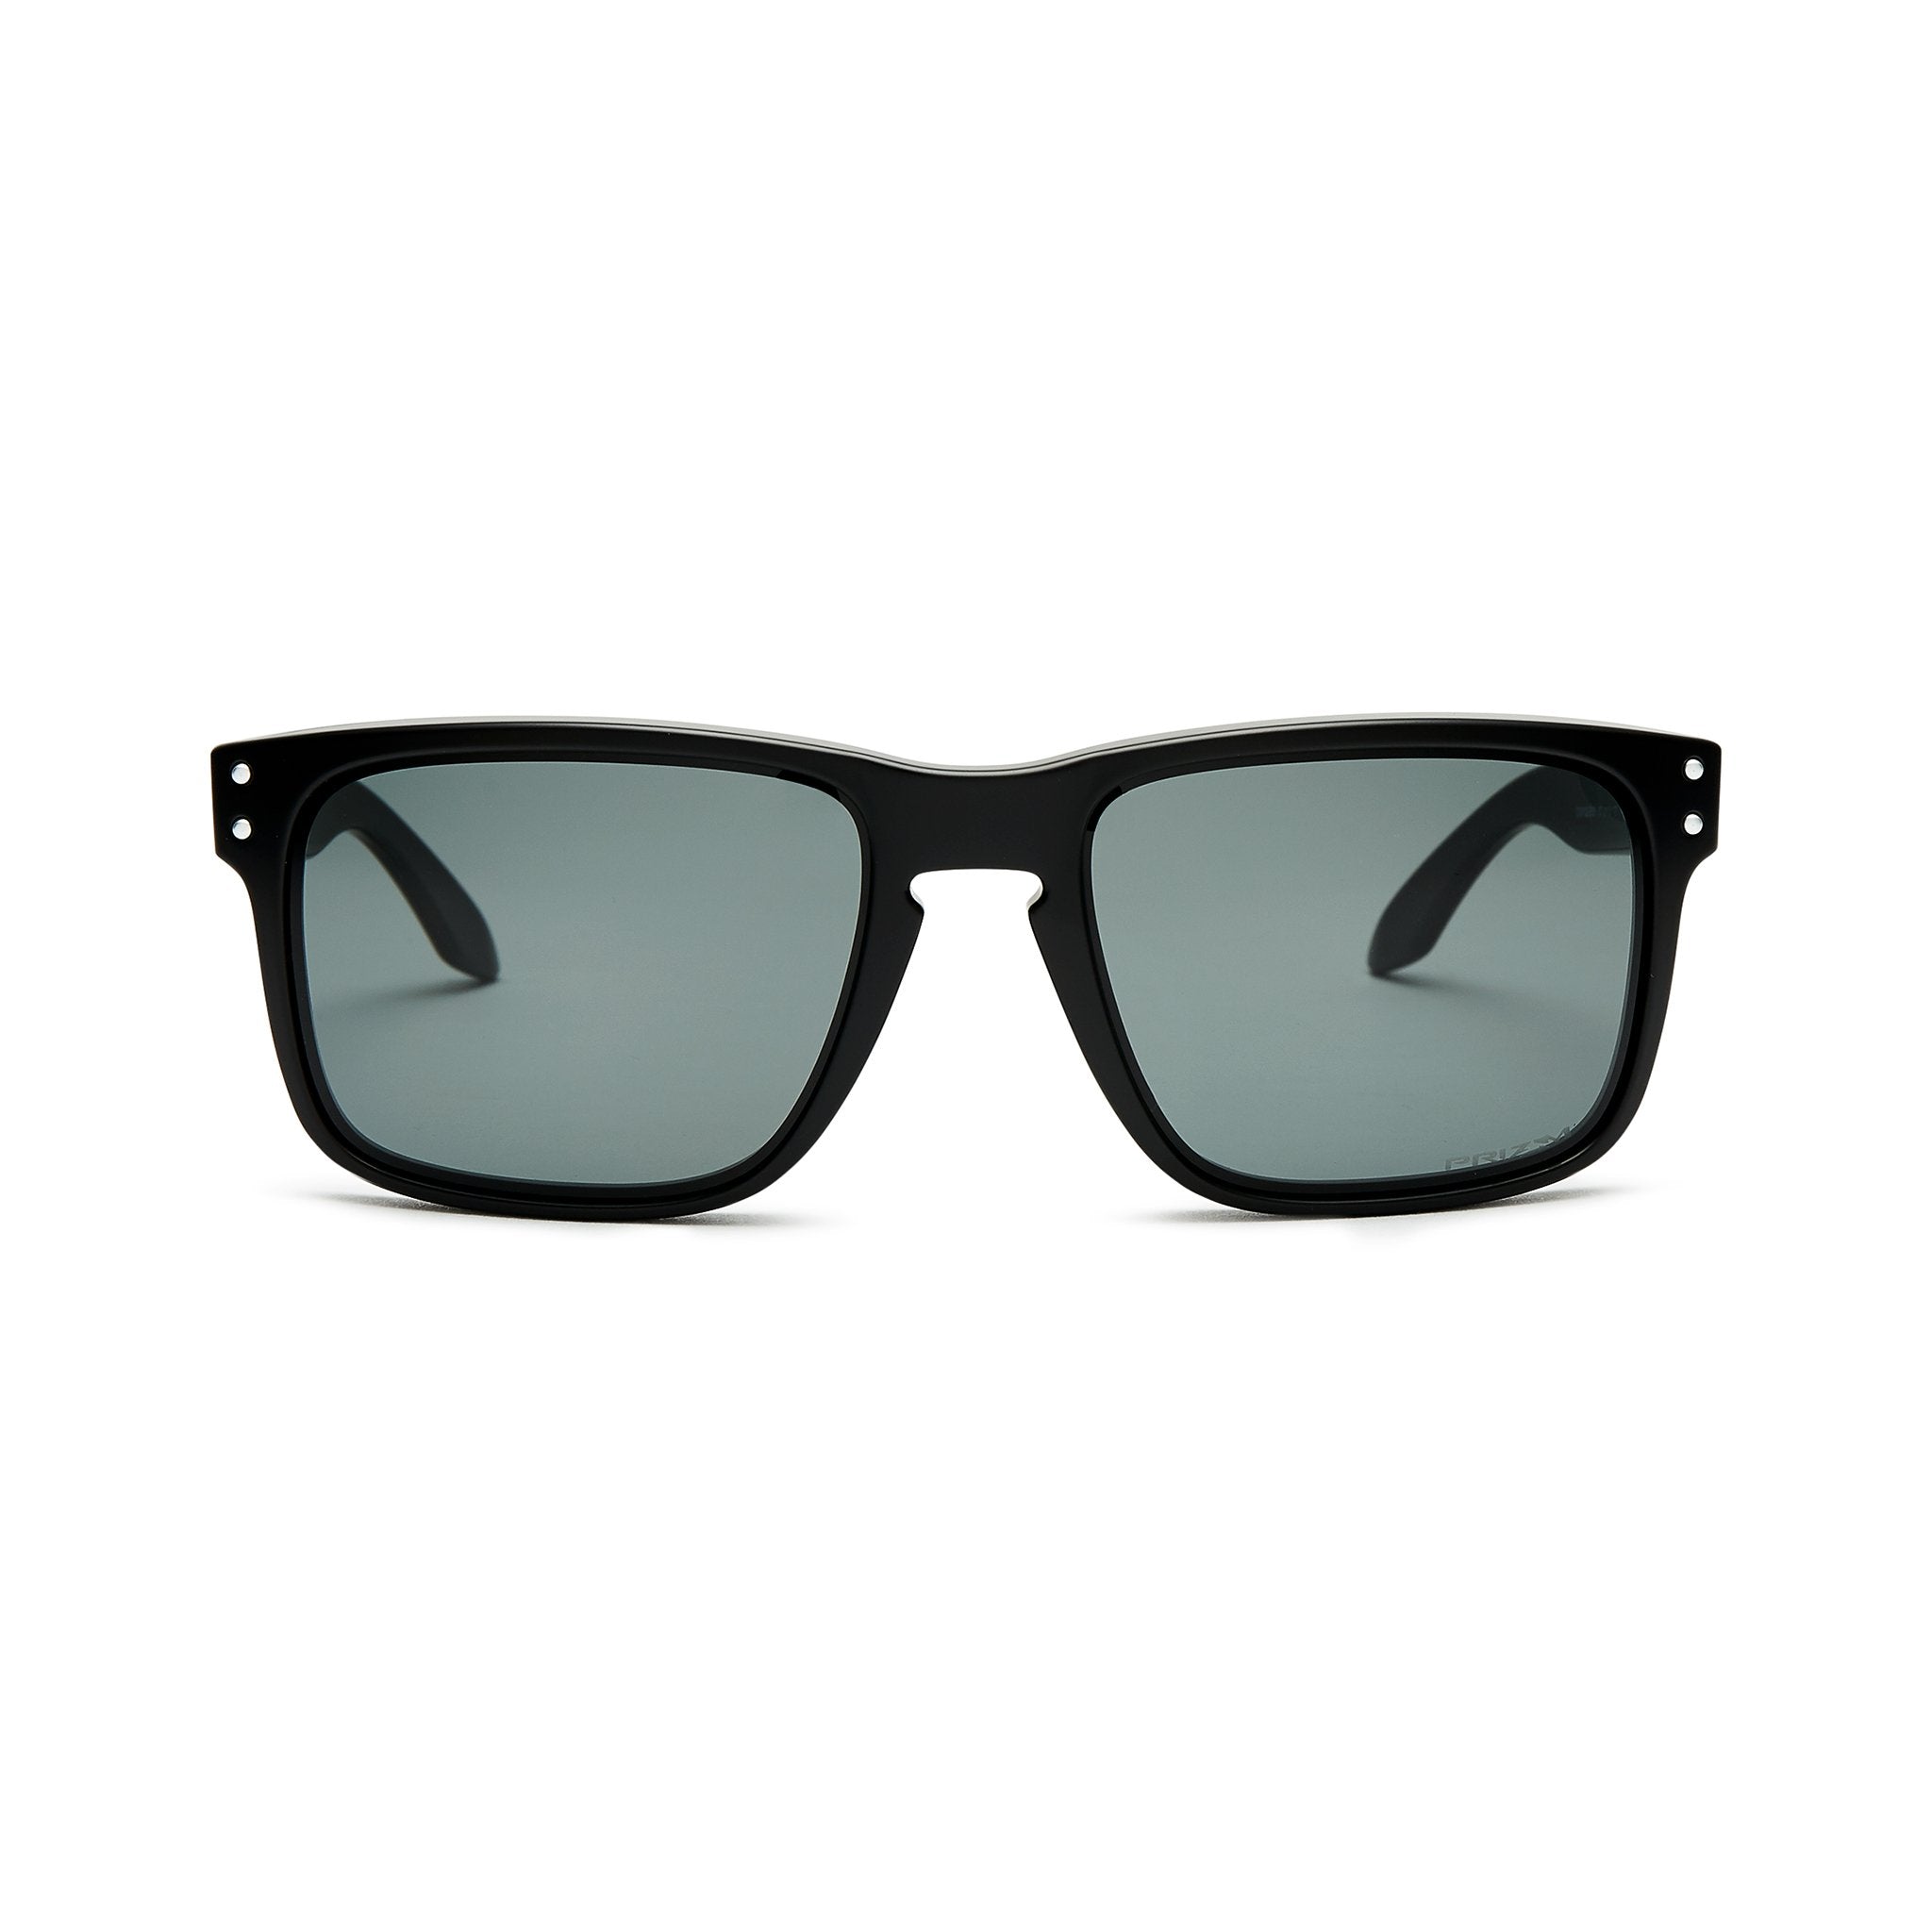 Designer UV400 Best Cycling Sunglasses For Men And Women Fashionable Mirror  Frame Glasses For Outdoor Sports And Biking Metal Frame Brand New From  Designera, $20.84 | DHgate.Com